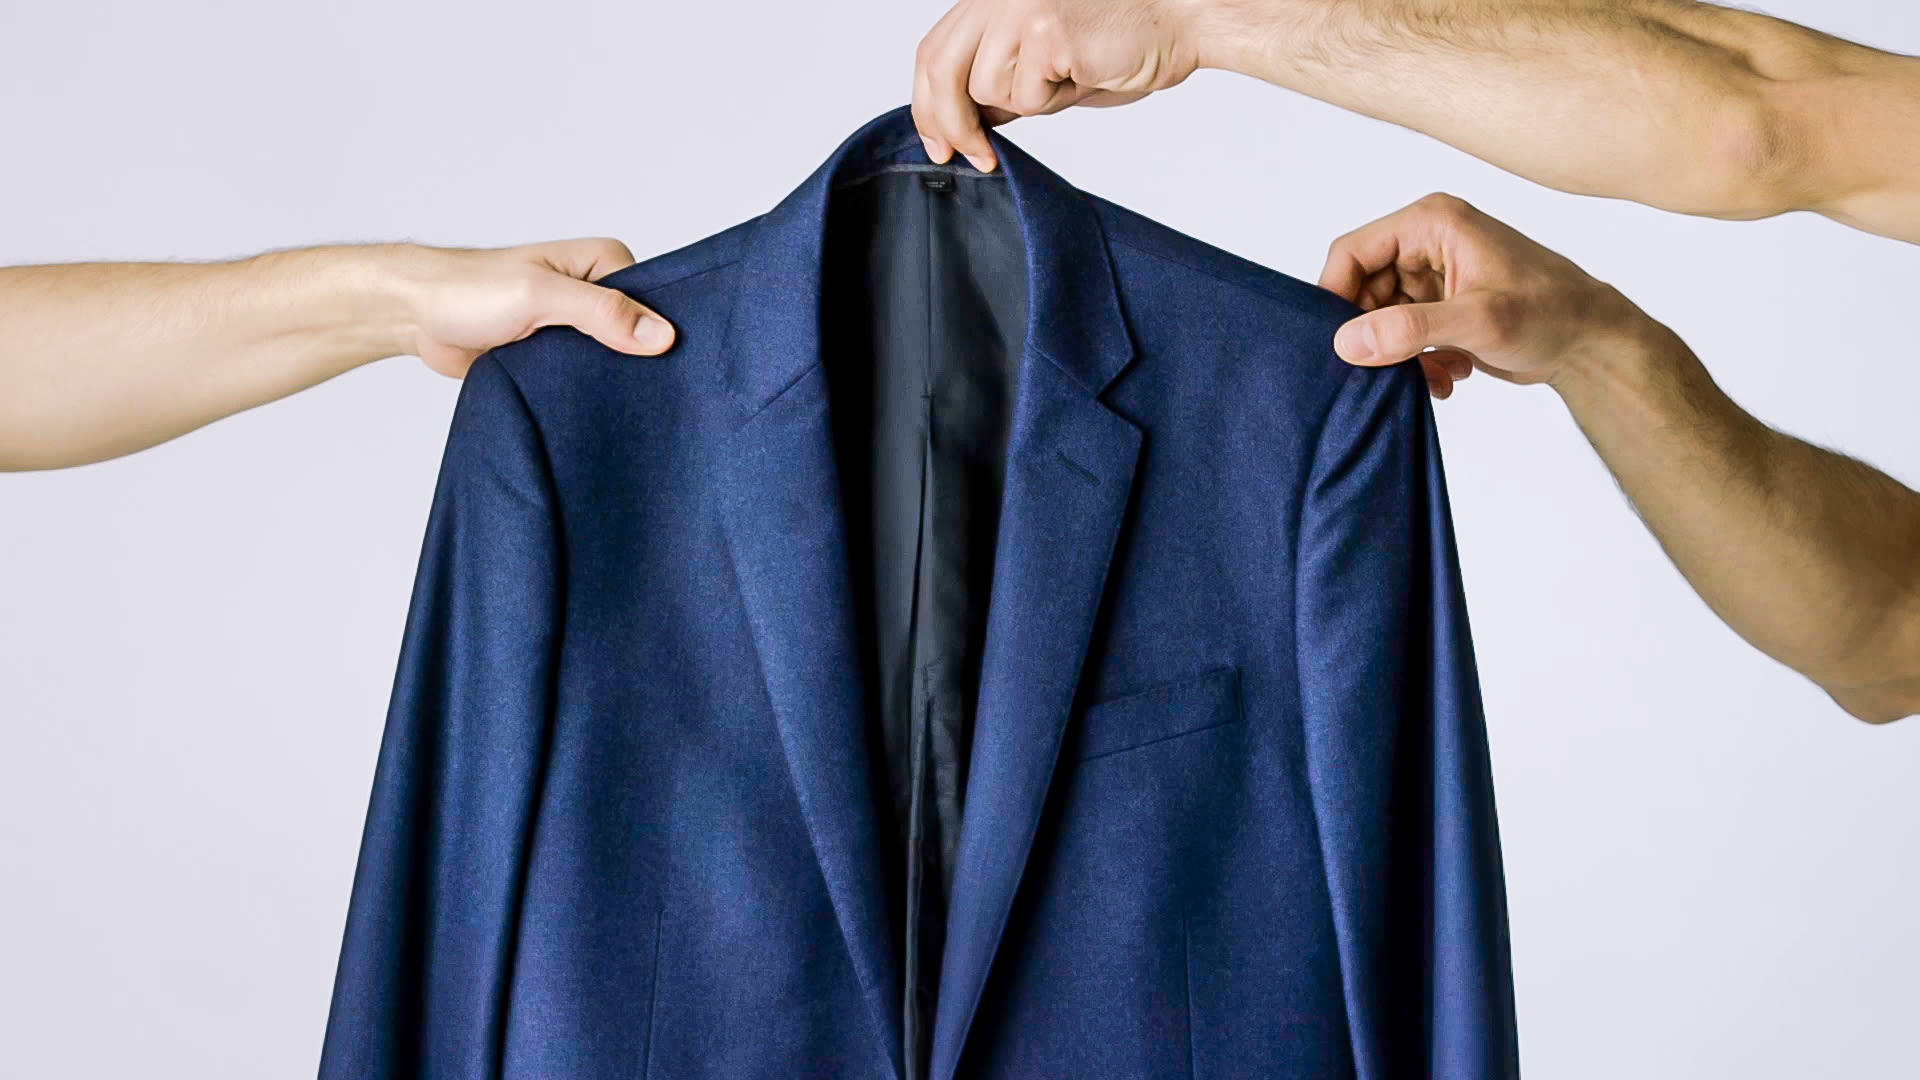 Watch How to Fold & Pack a Suit The Right Way, How to Do It Better